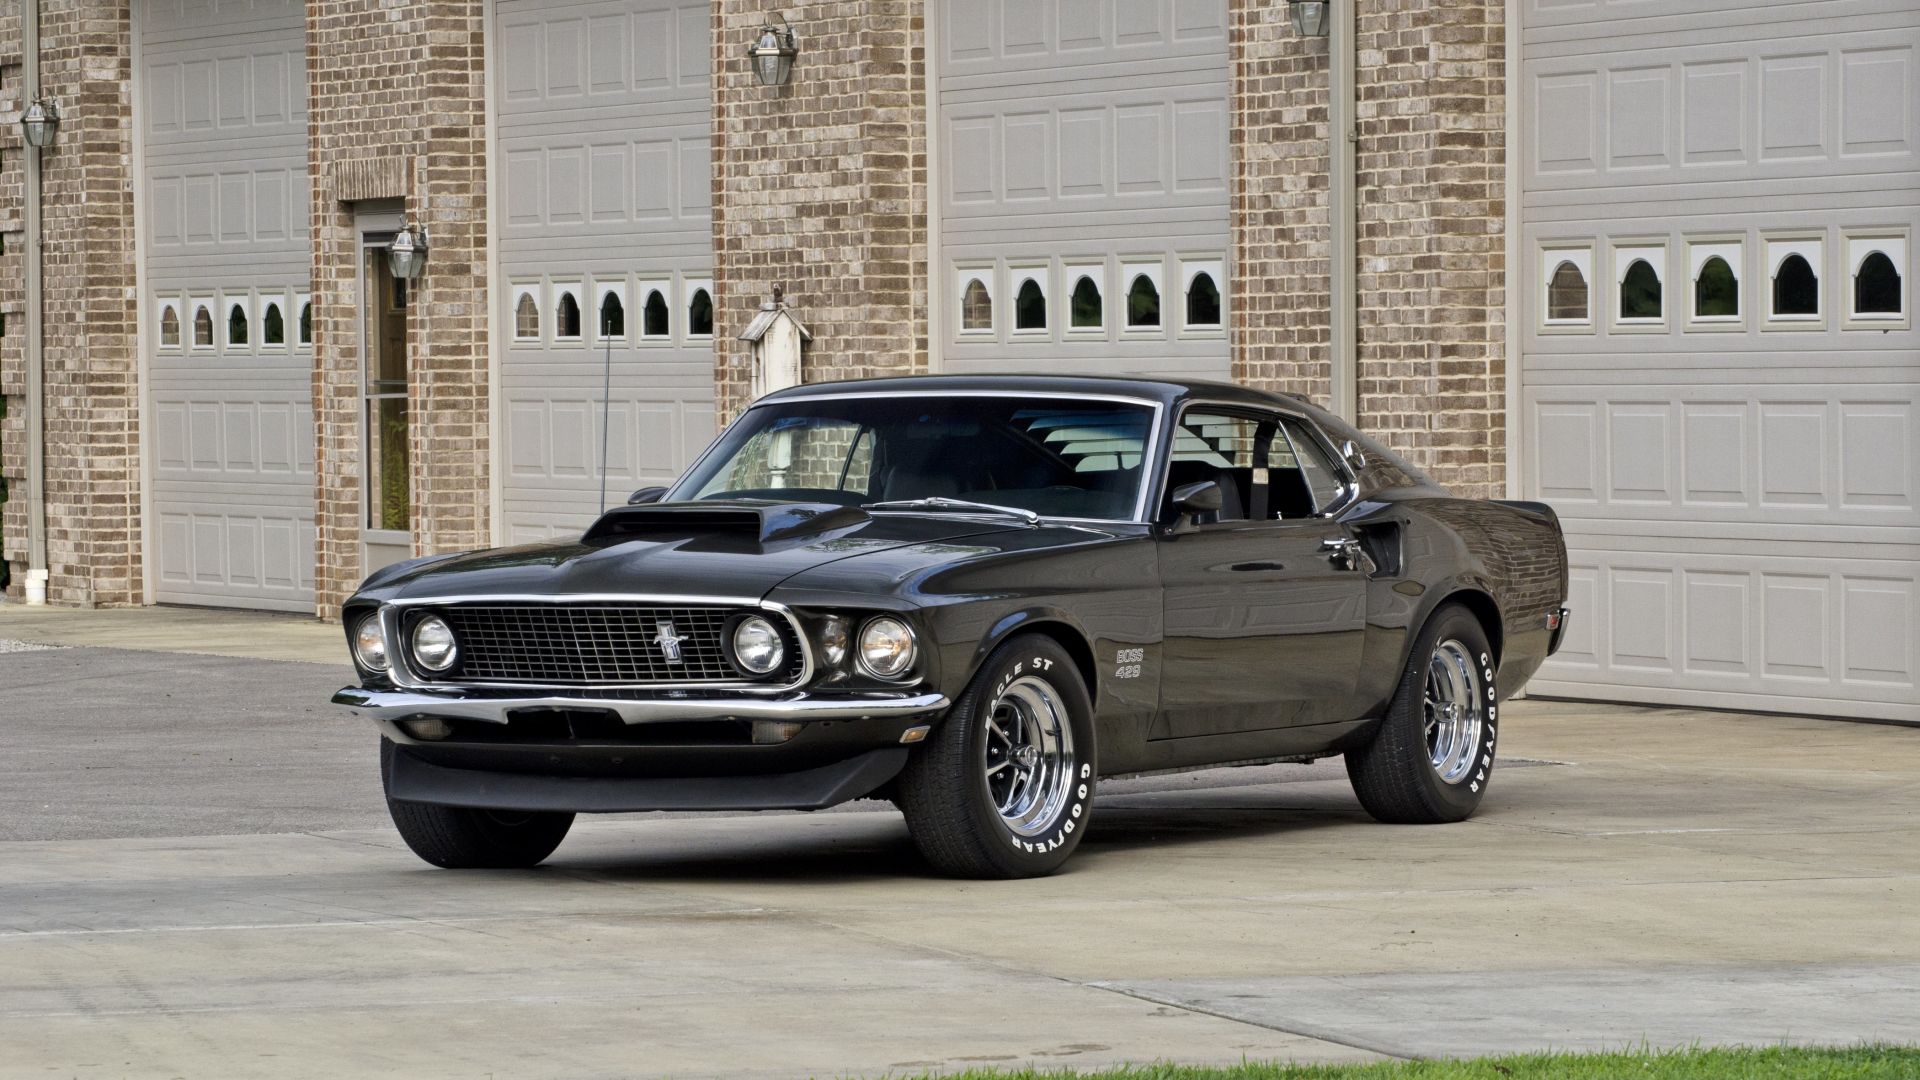 Black, 1969 ford mustang boss 429 wallpaper, HD image, picture, background, 8b0af7